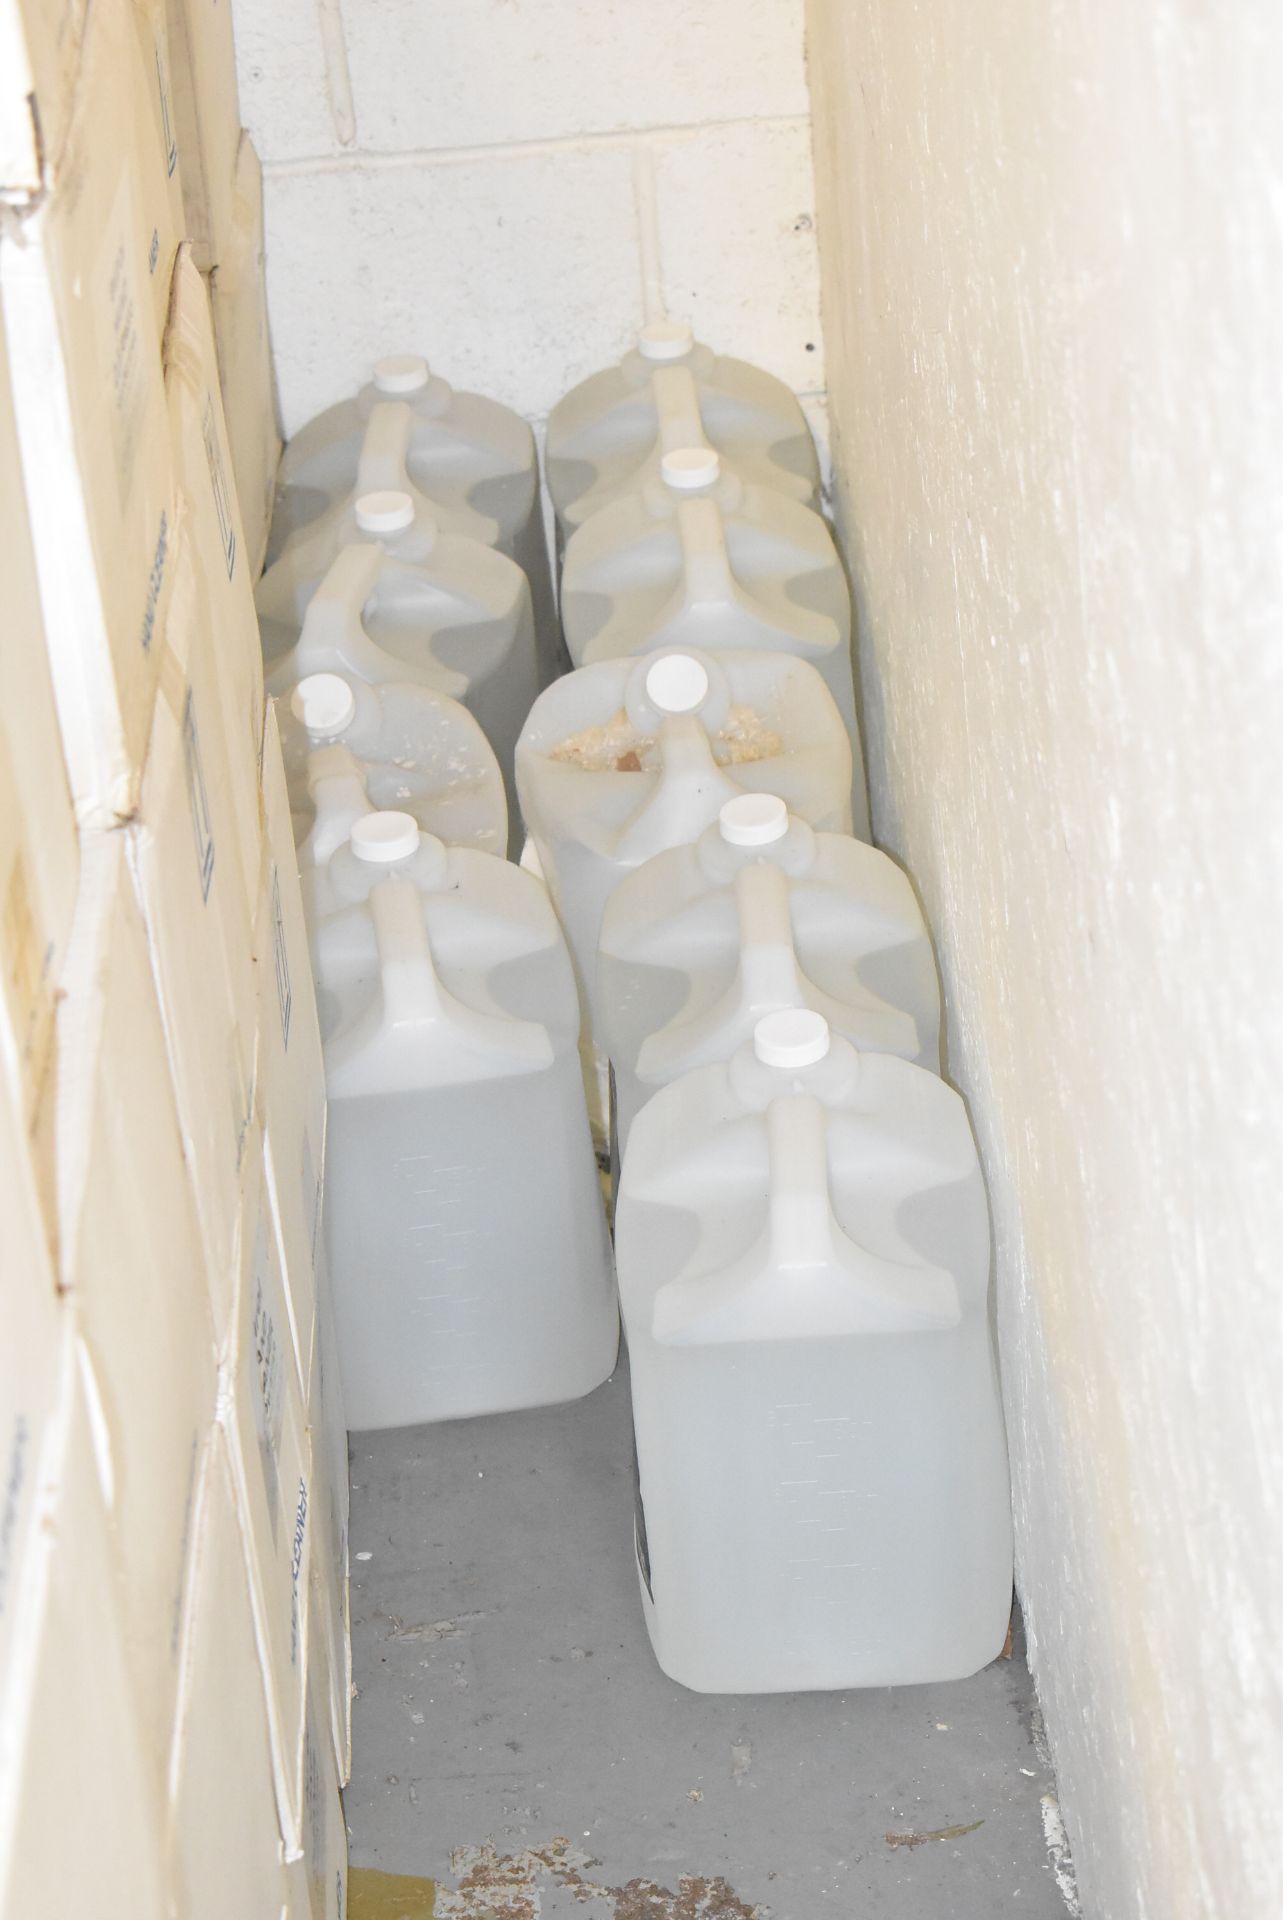 LOT/ APPROX. (50) 2.5 GALLON JUGS OF FLO-PERM DIESEL EXHAUST FLUID - Image 3 of 4